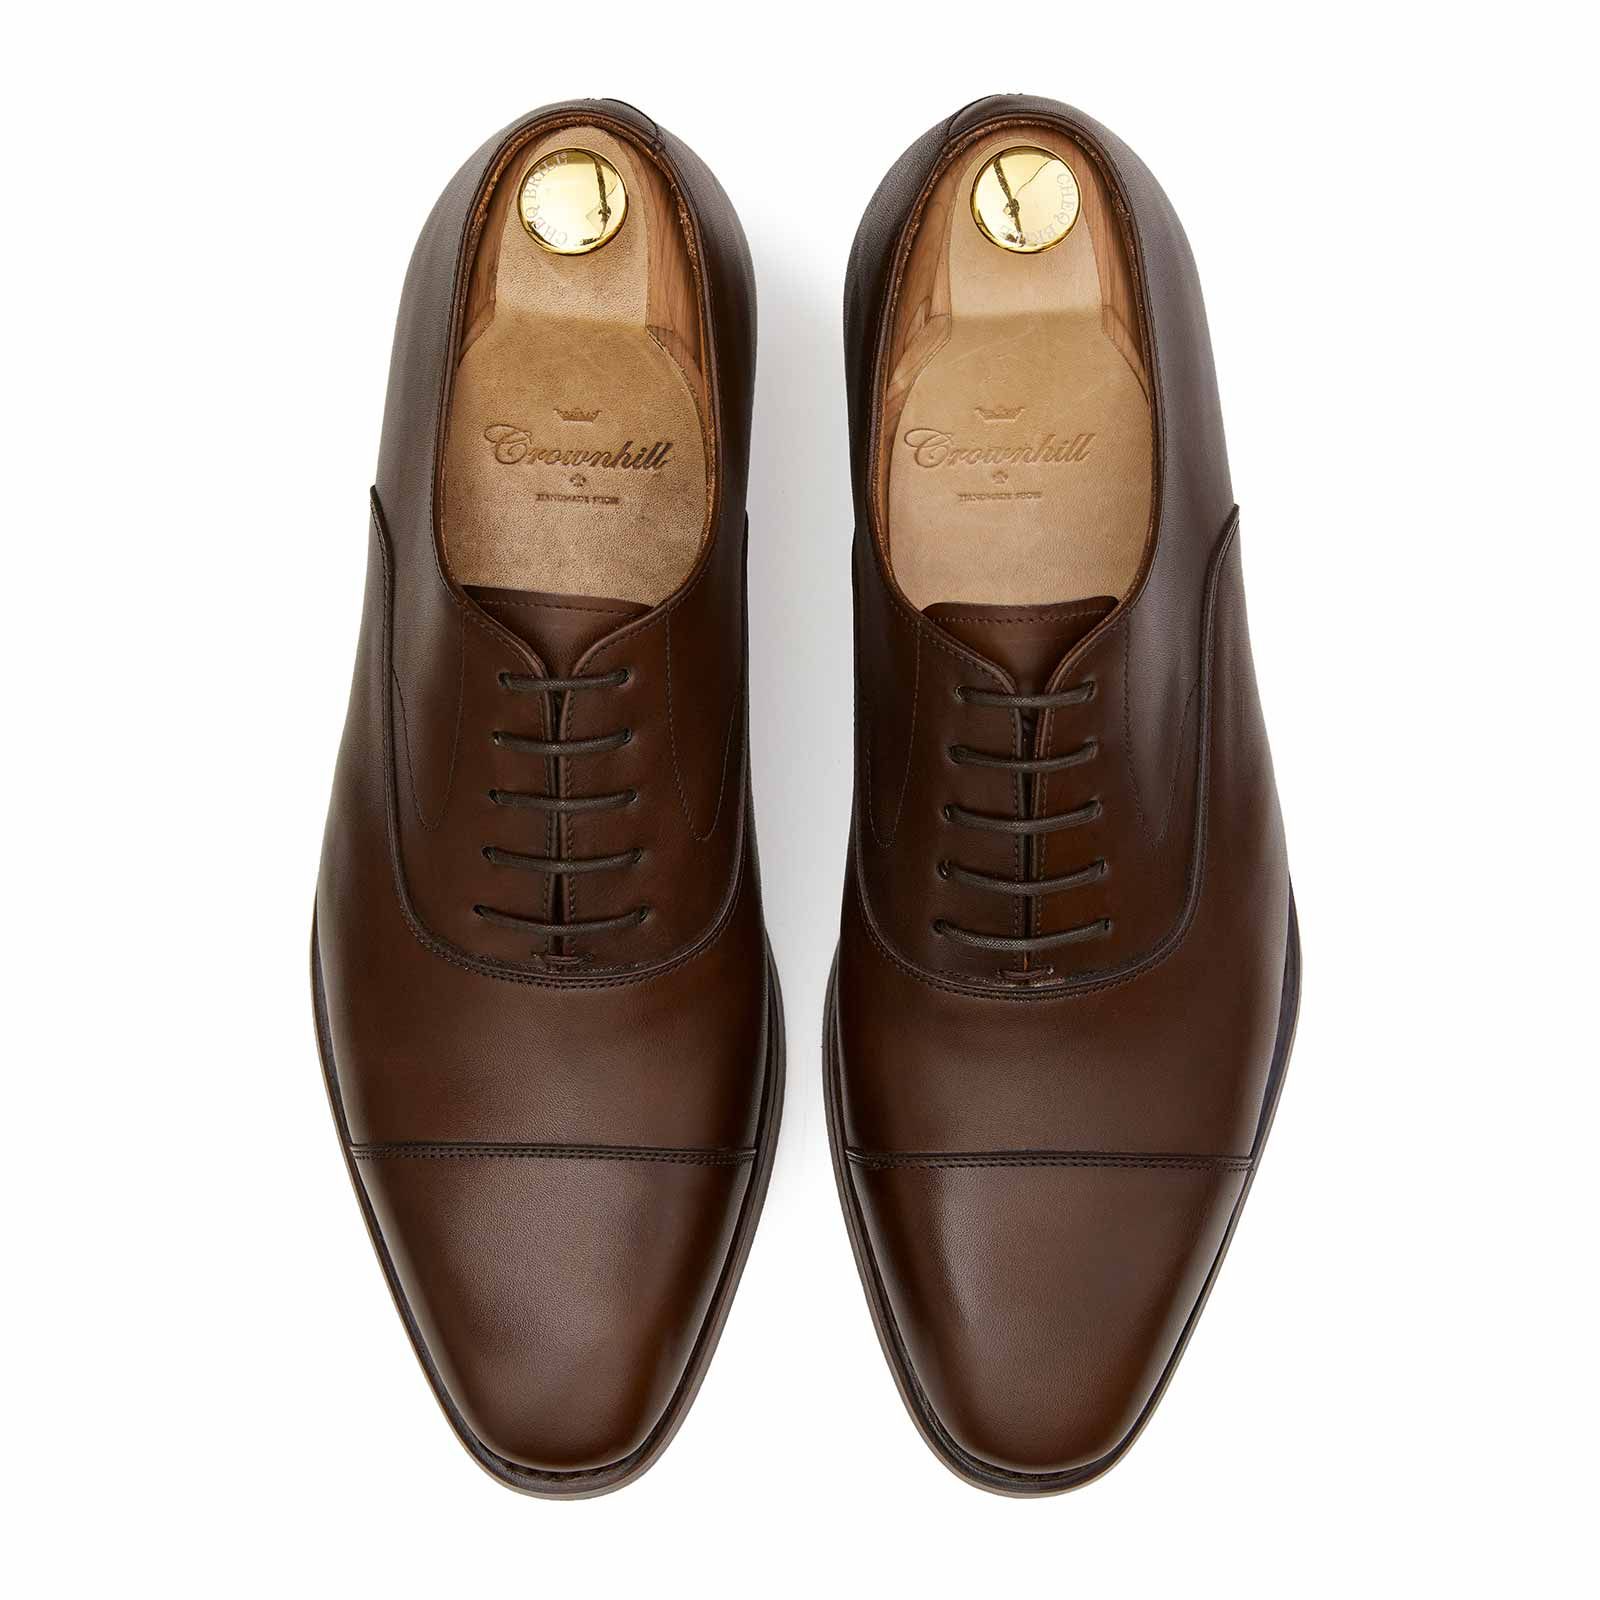 The Stewart: Oxford | Crownhill Shoes